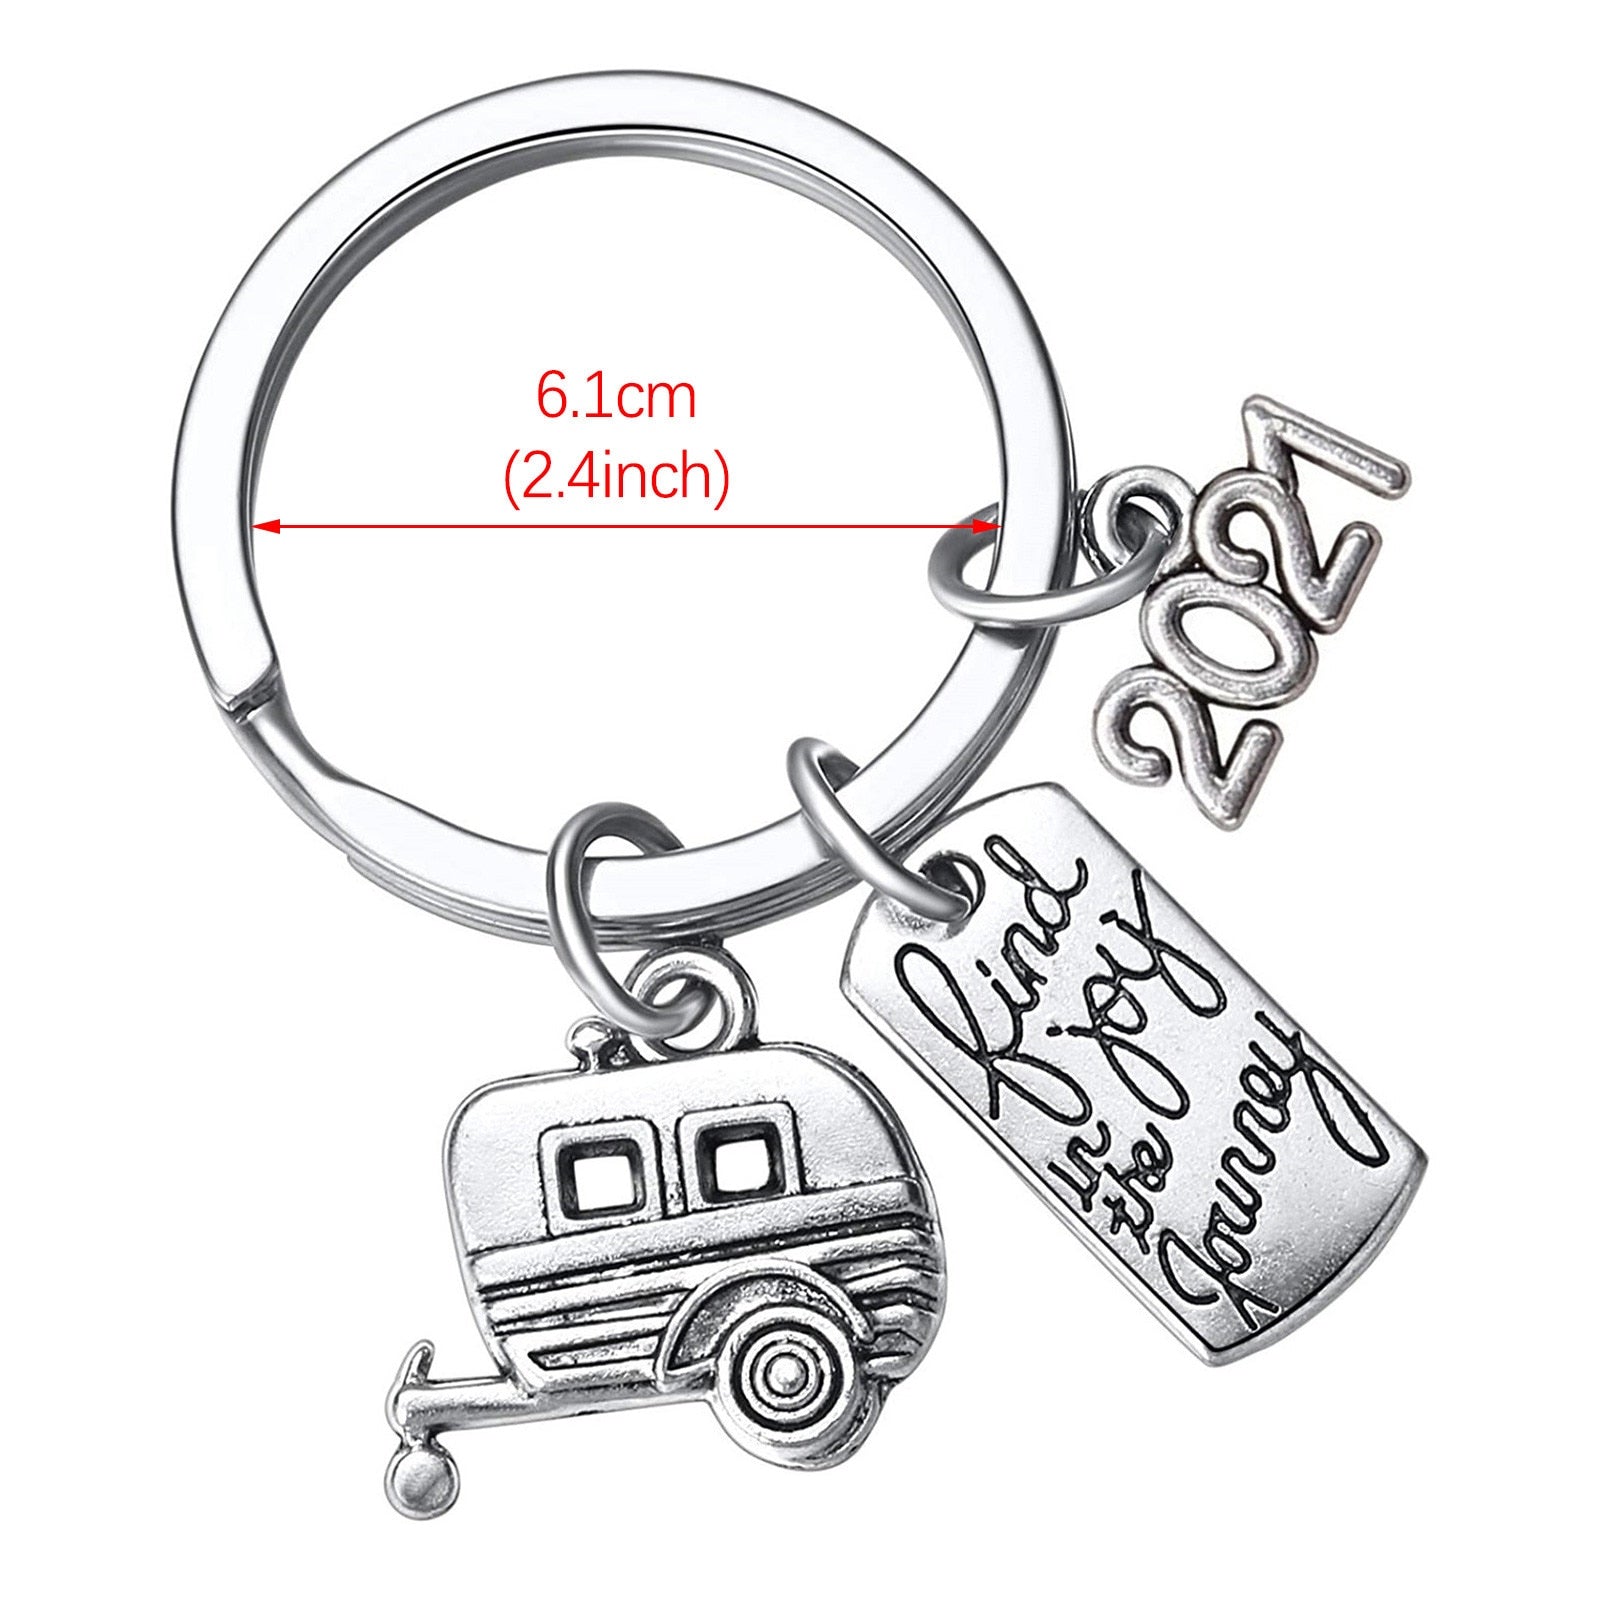 2021 Find In The Journey Rv Outdoor Gift Retirees Memorial Keychain Multifunction Carry Bag Others Multiple Pendants DAIGELO - 200000174 Find Epic Store